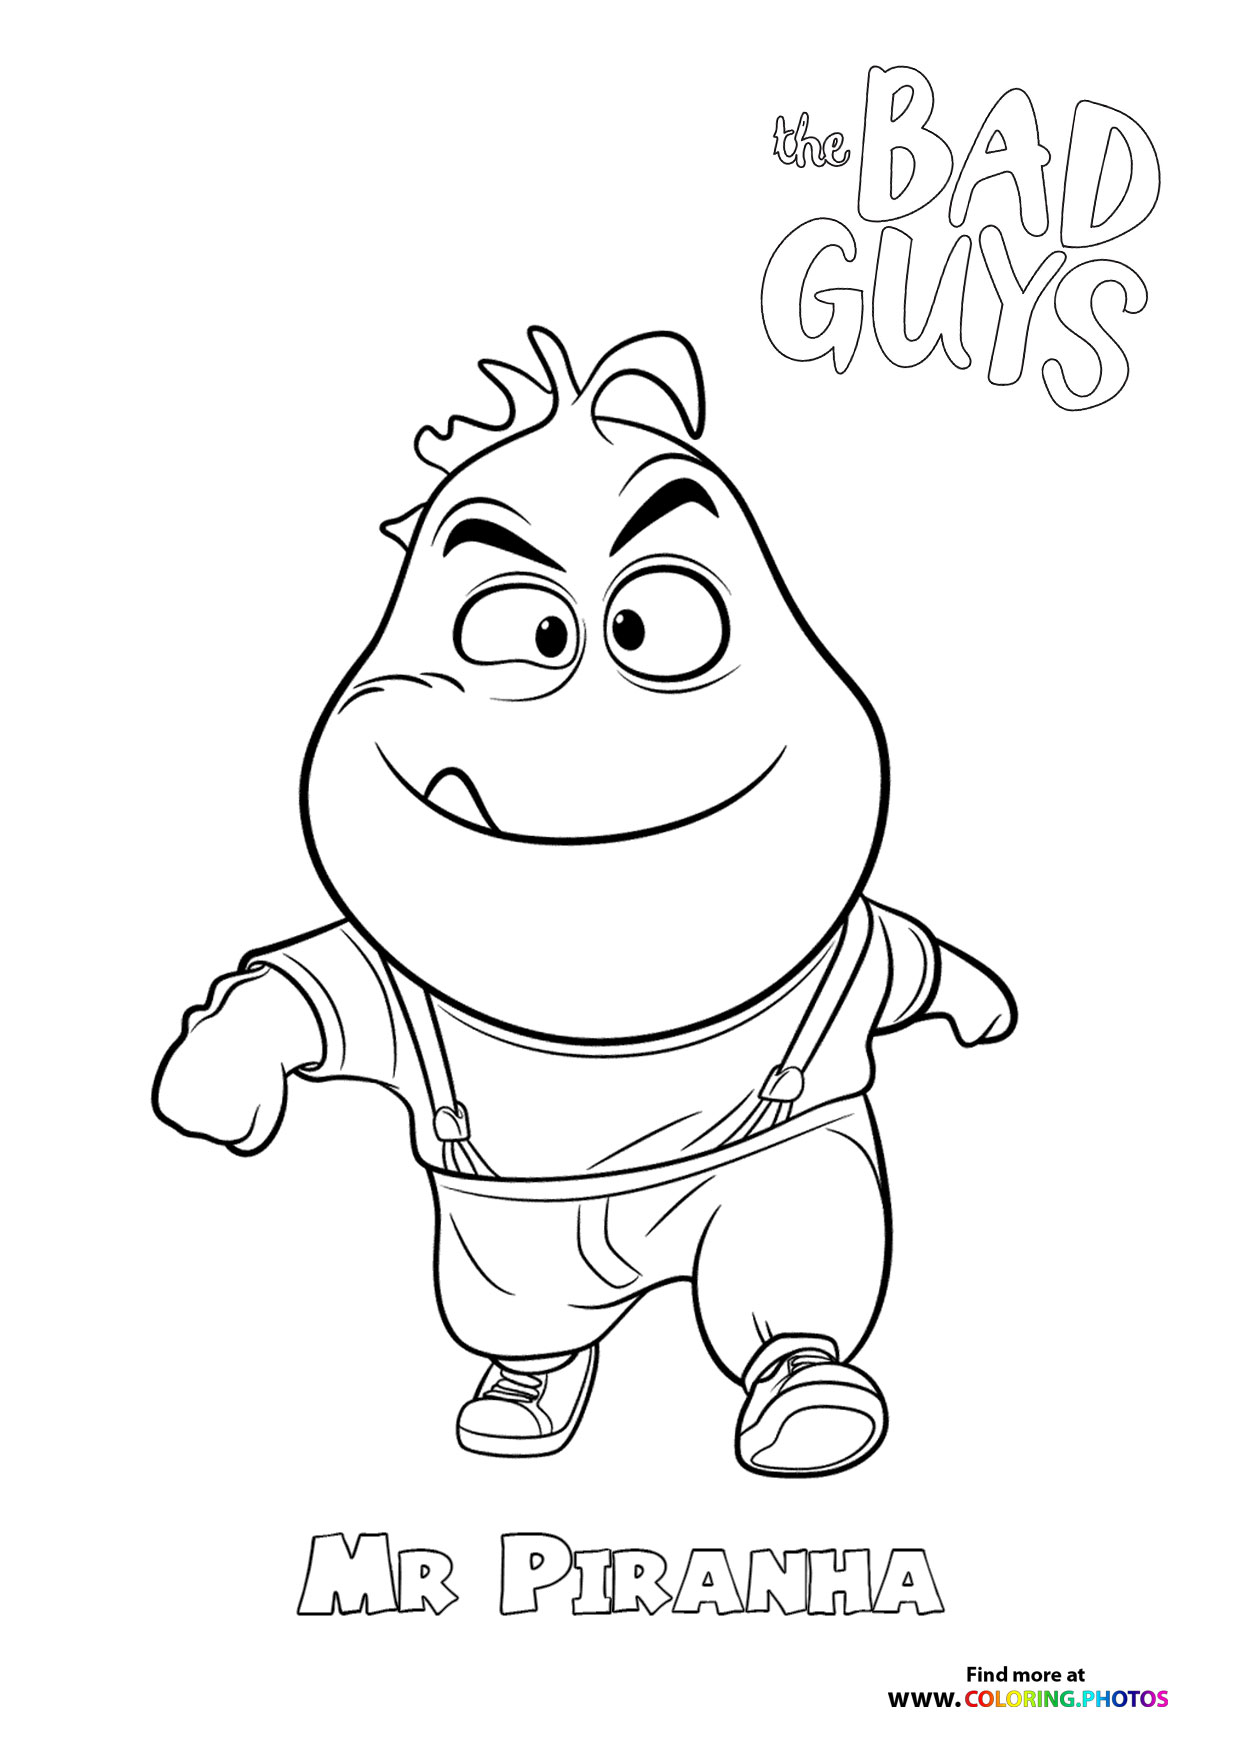 Bad guy mr piranha - Coloring Pages for kids